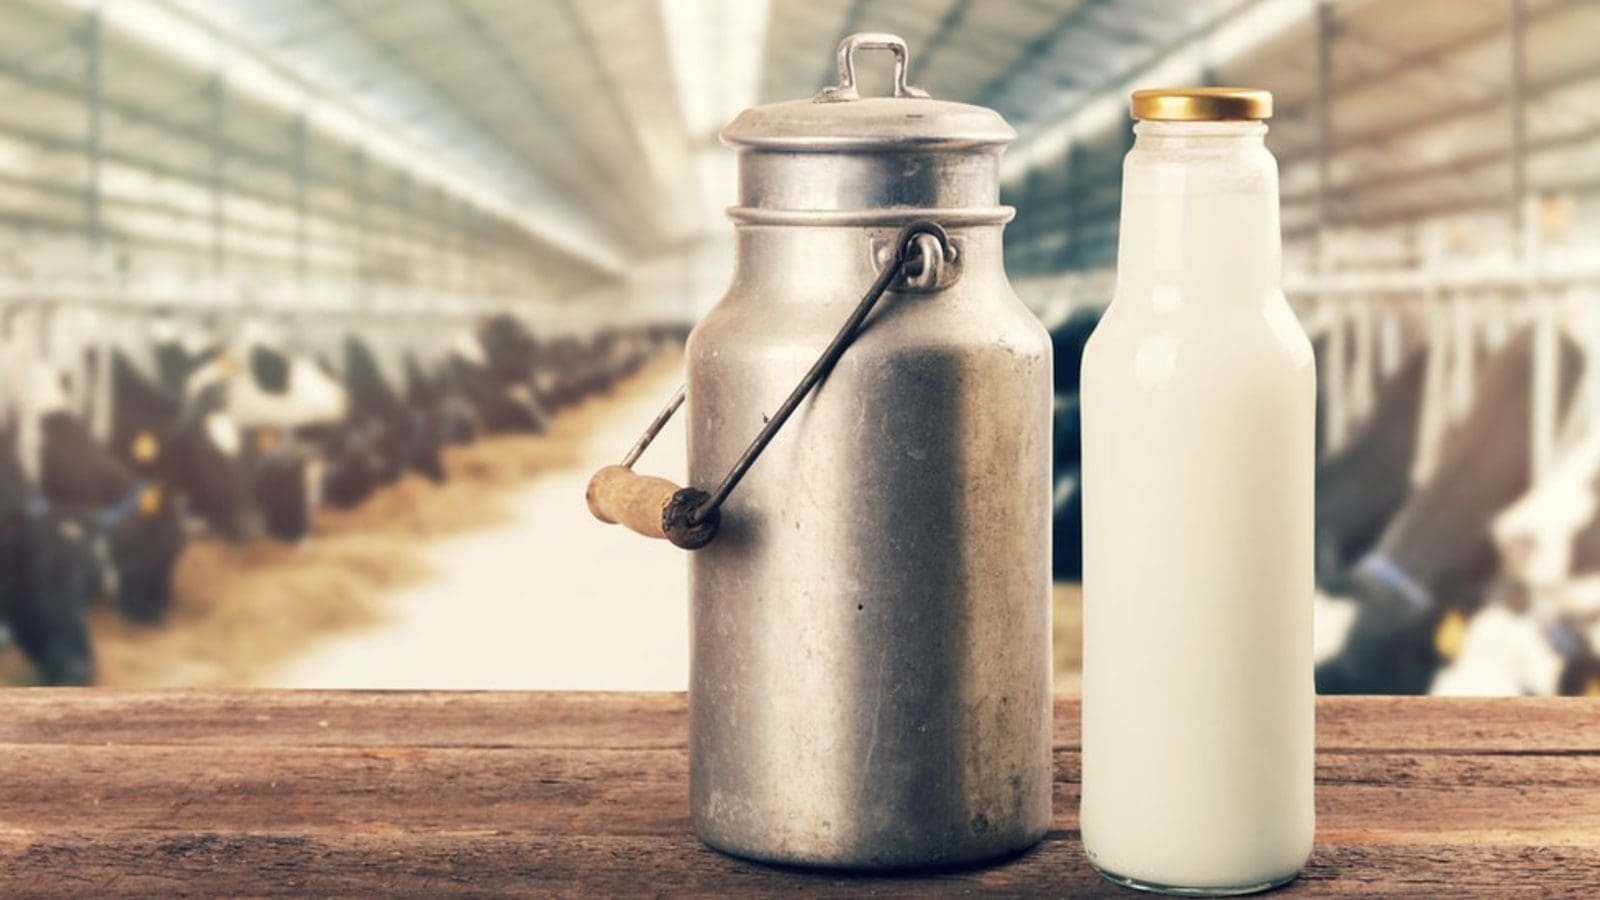 Dairy product imports witness a 26% decline amid surge in local production